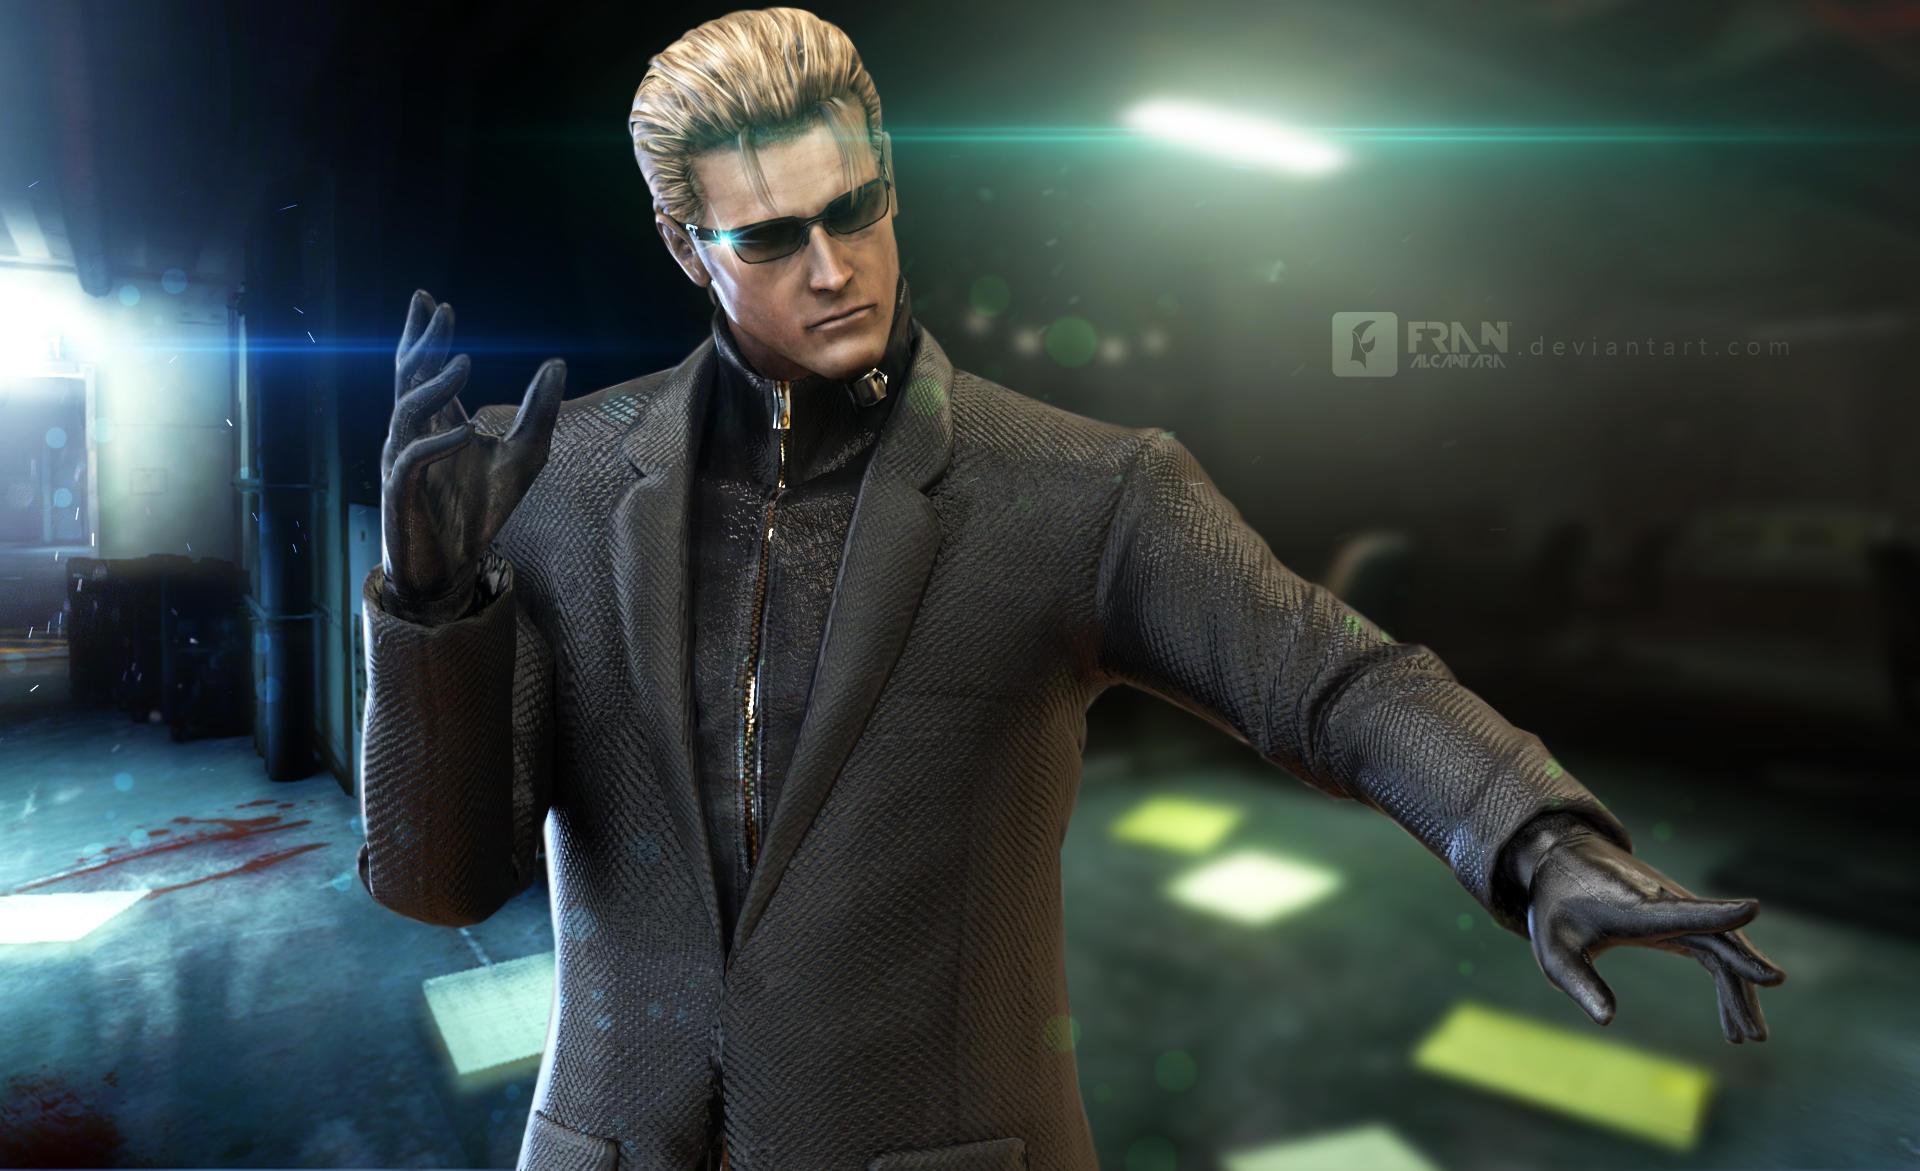 Albert Wesker is one of my favorite video game villains of all time